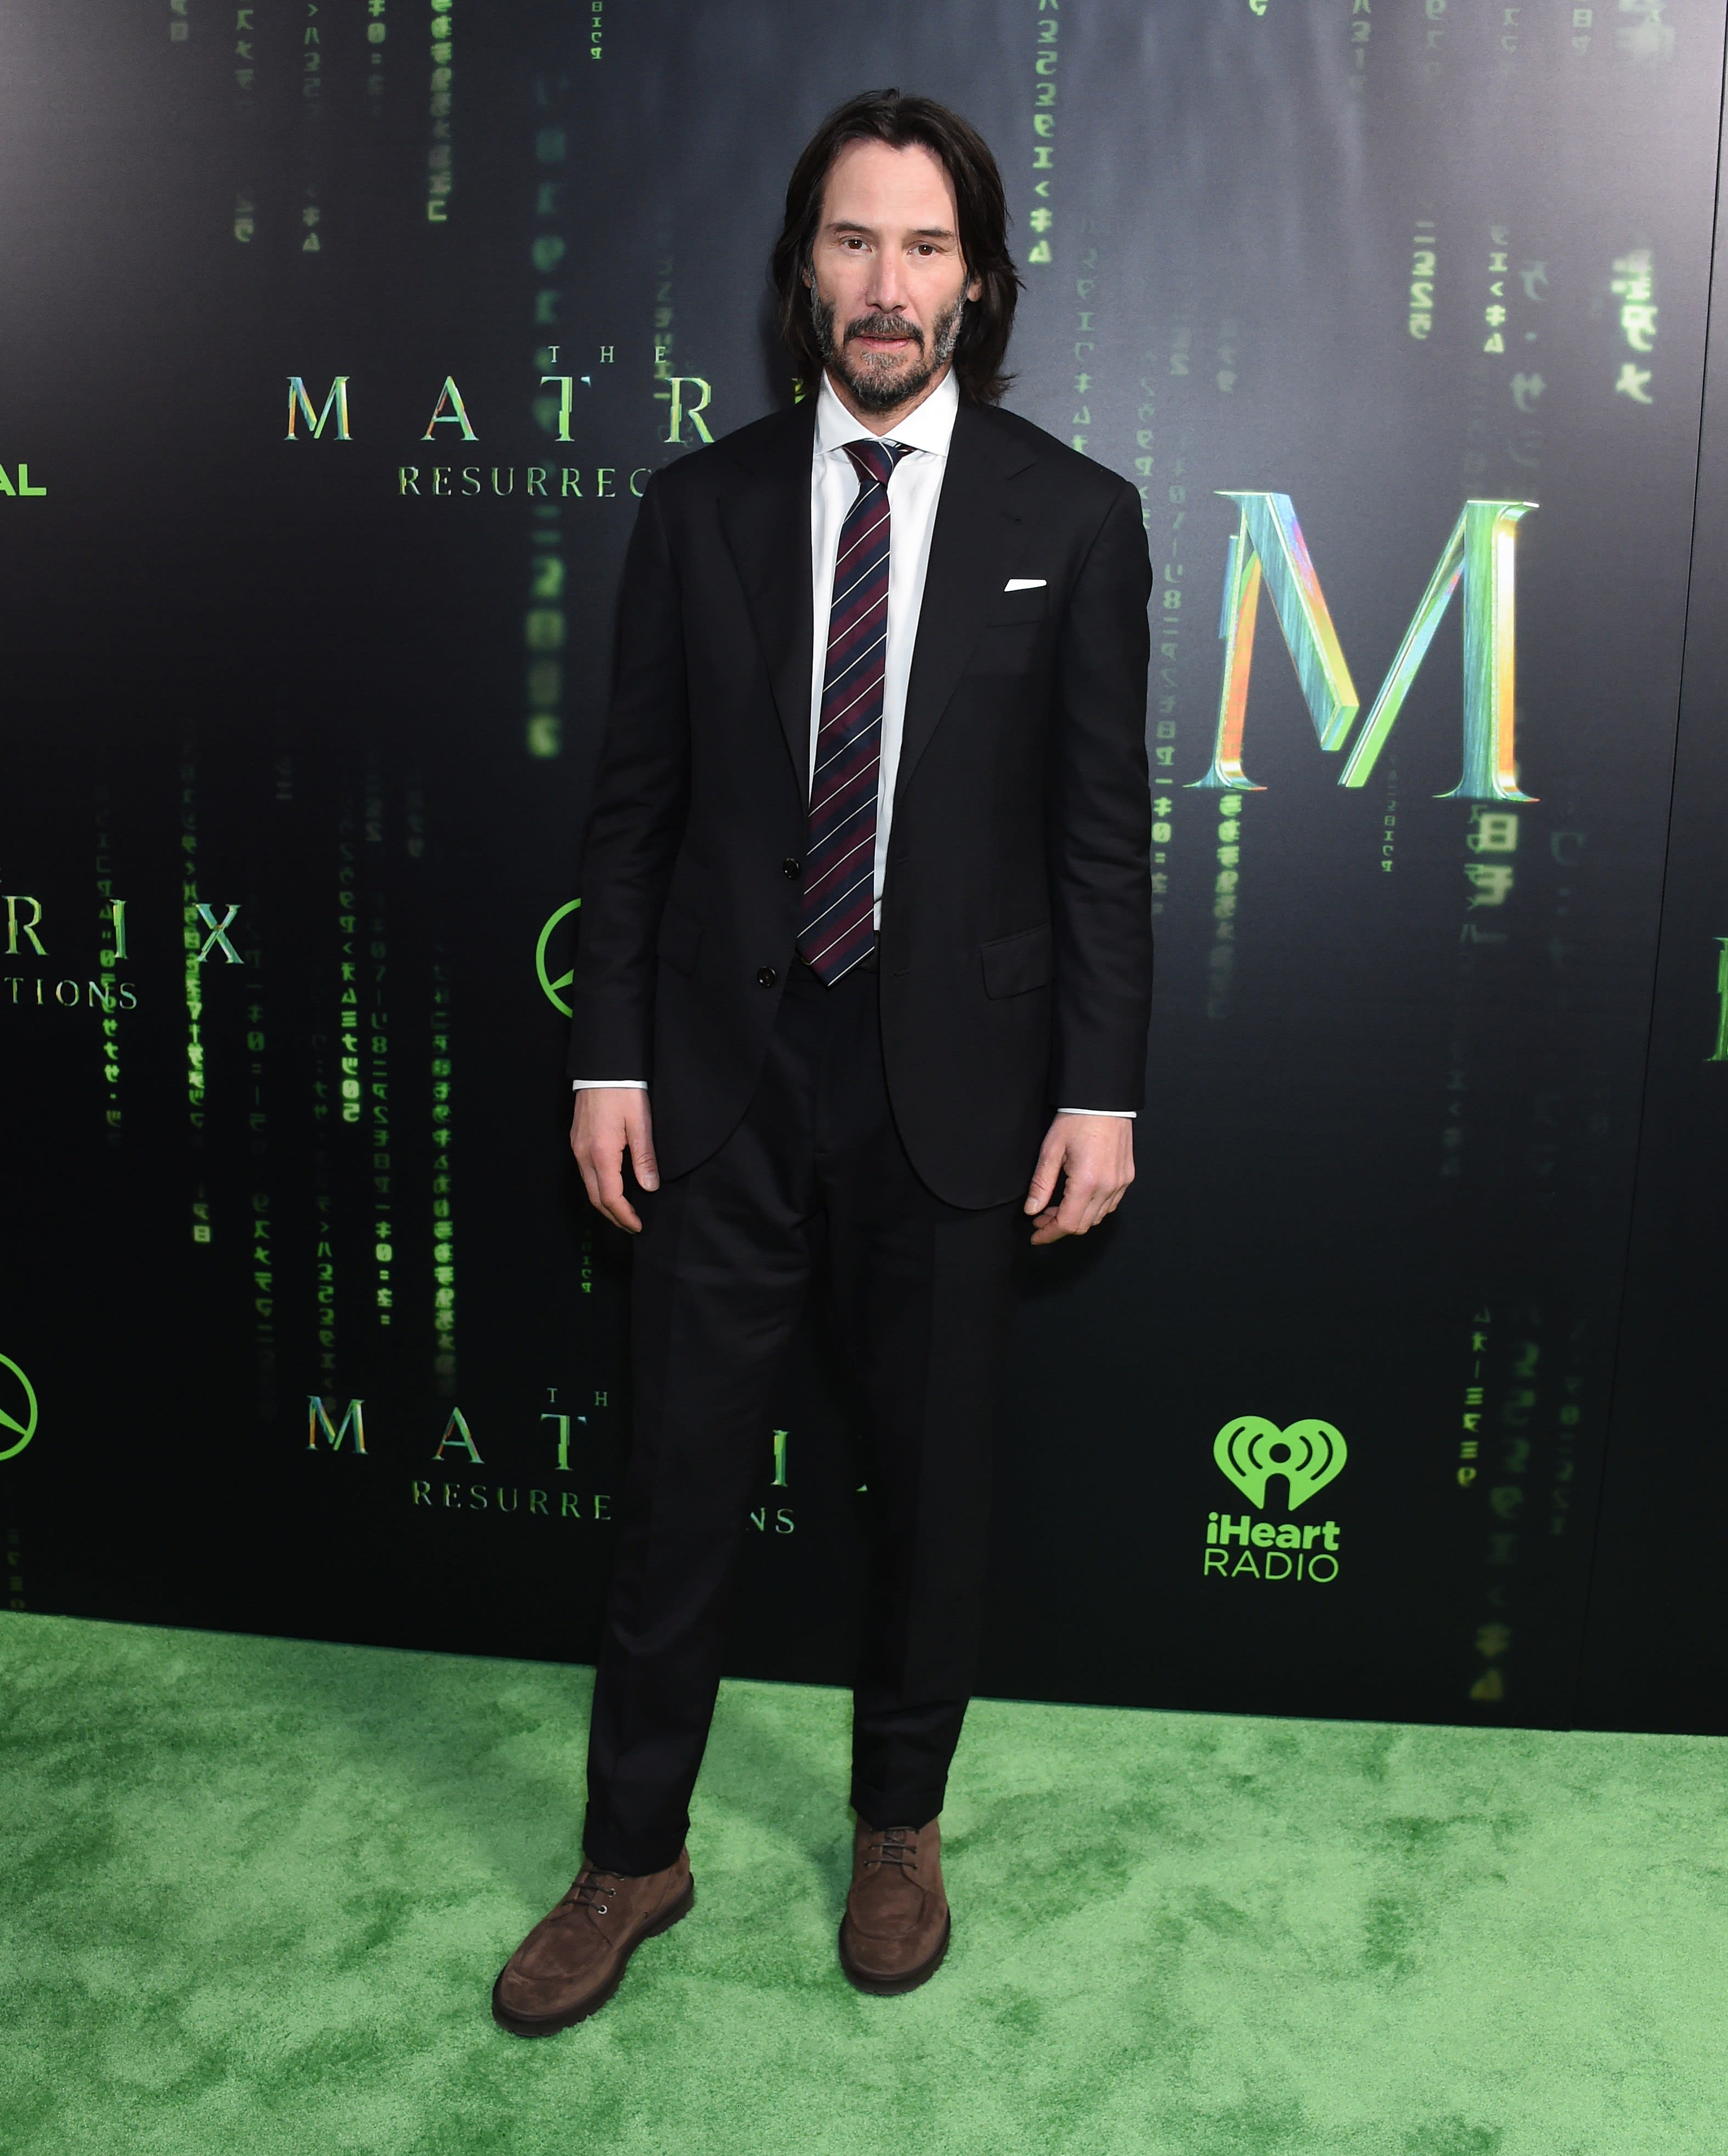 Keanu Reeves Treated Friends, Family & Co-Workers To “Epic” Celebration At The Matrix Resurrection Premiere In San Francisco